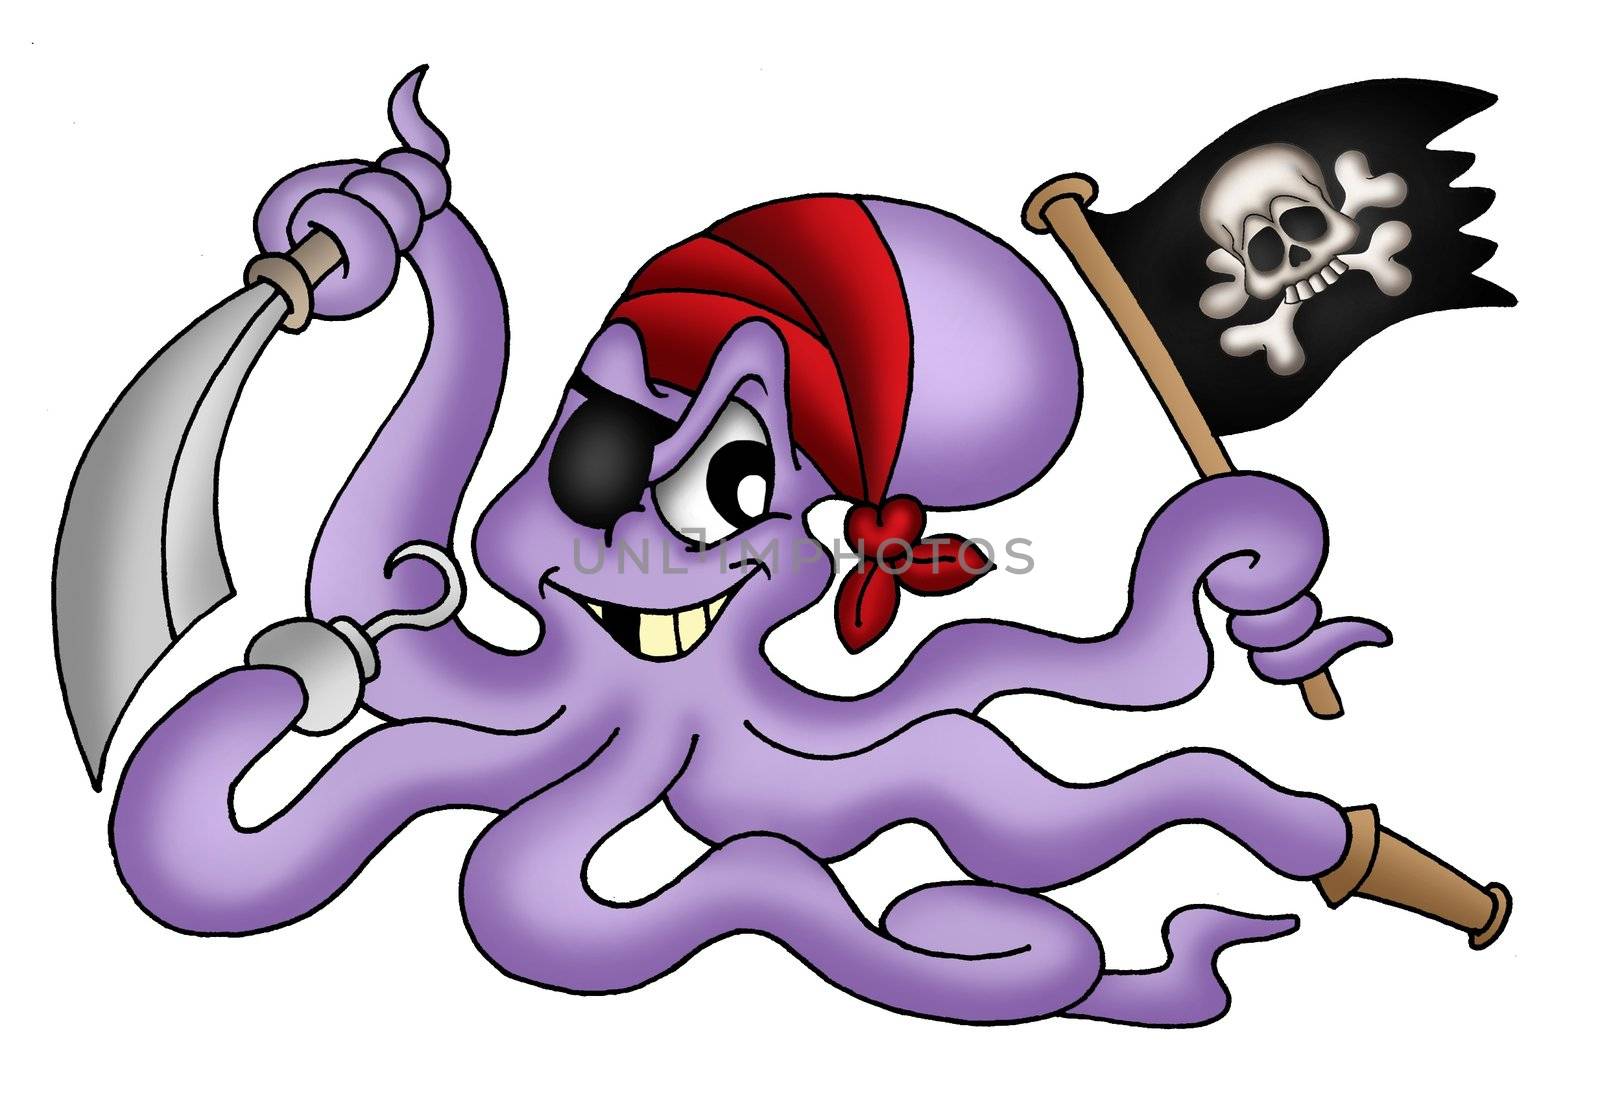 Pirate octopus by clairev